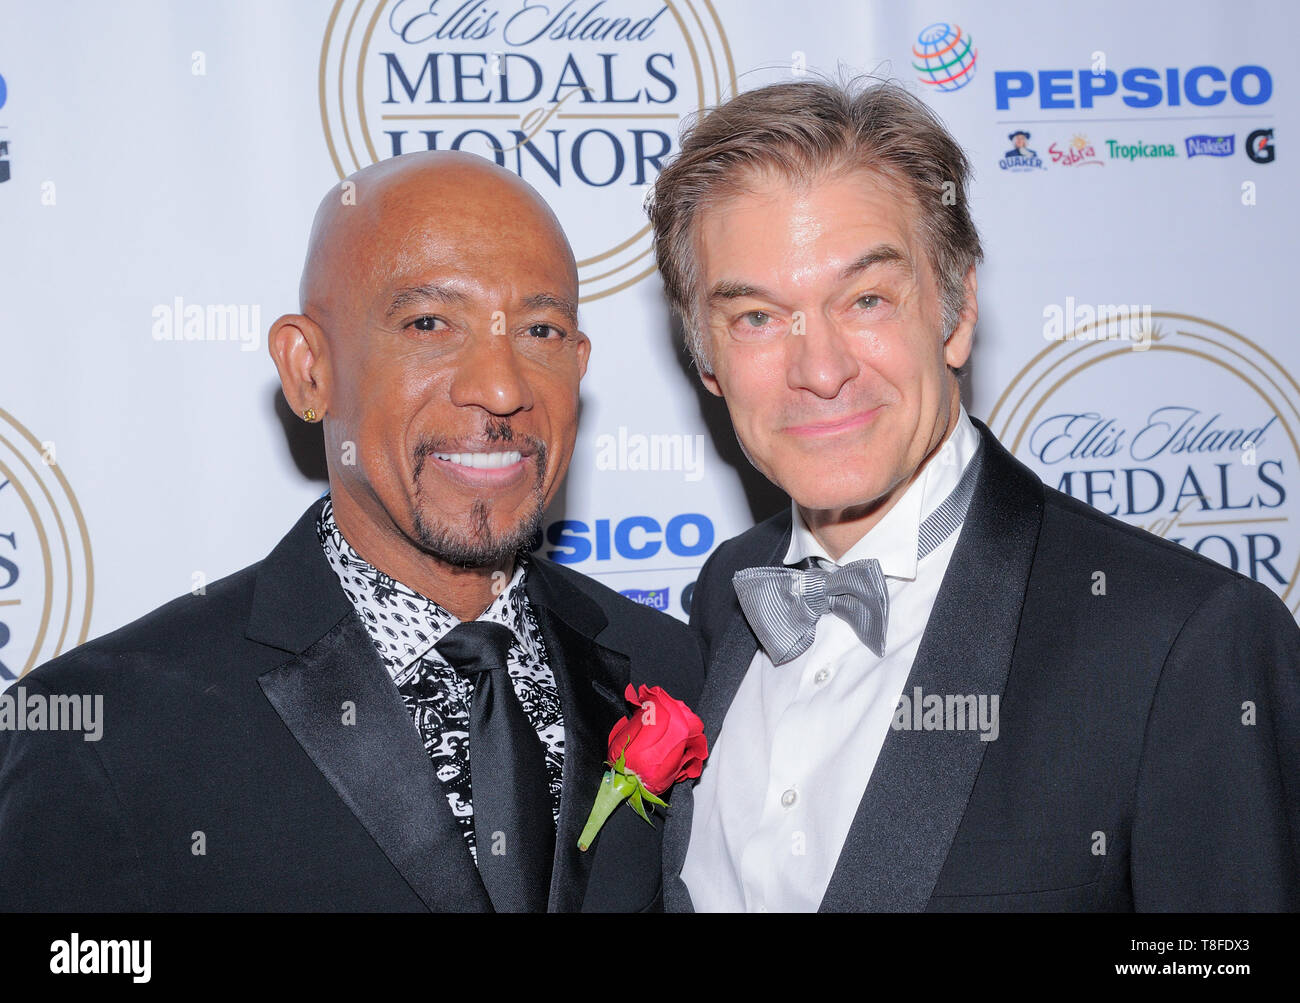 Ellis Island, NY - May 11, 2019: Montel Williams and Mehmet Oz attend the 34th Annual Ellis Island Medals Of Honor Ceremony at Ellis Island Stock Photo